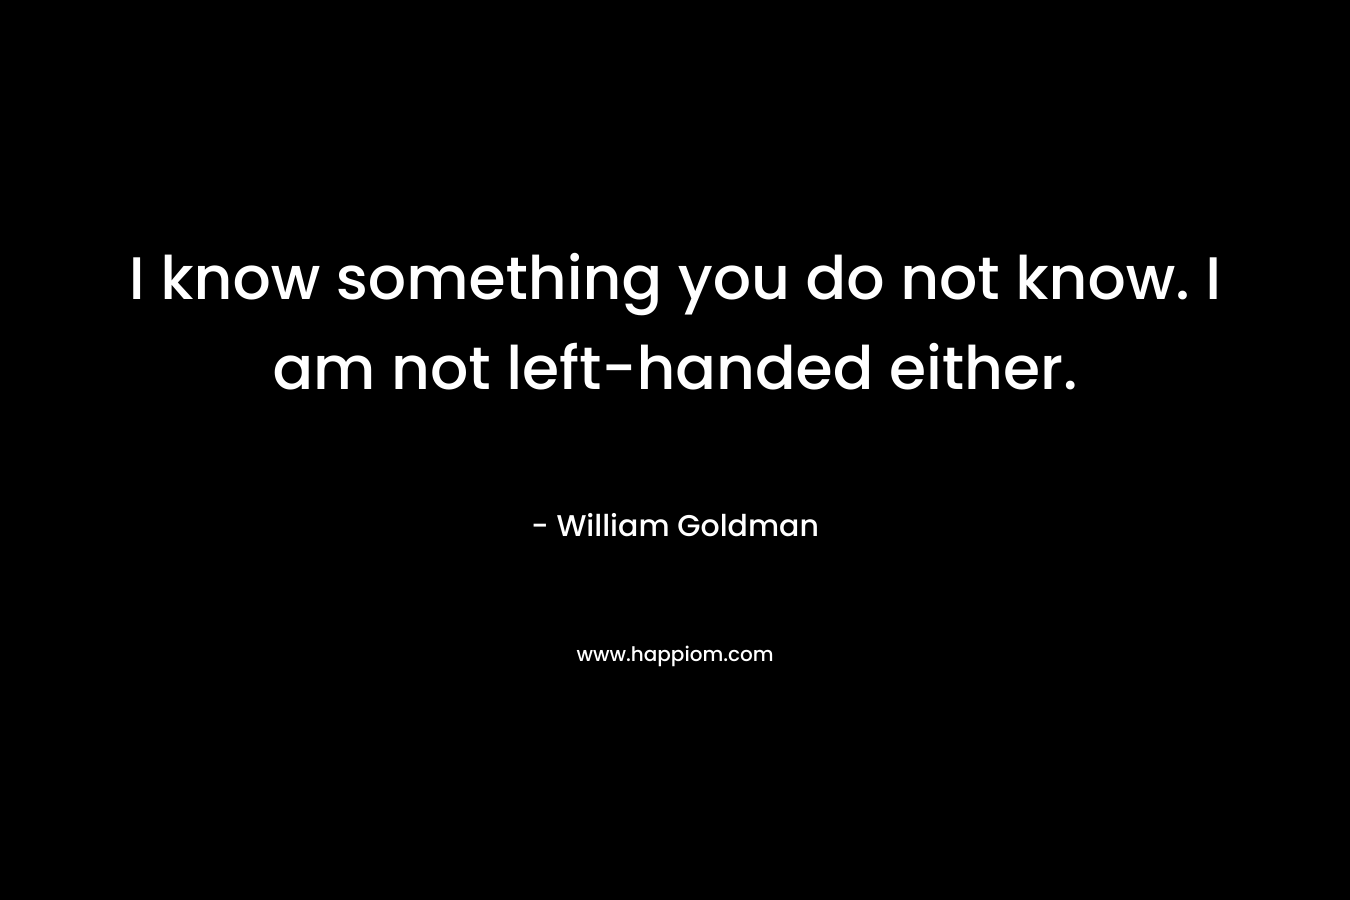 I know something you do not know. I am not left-handed either.